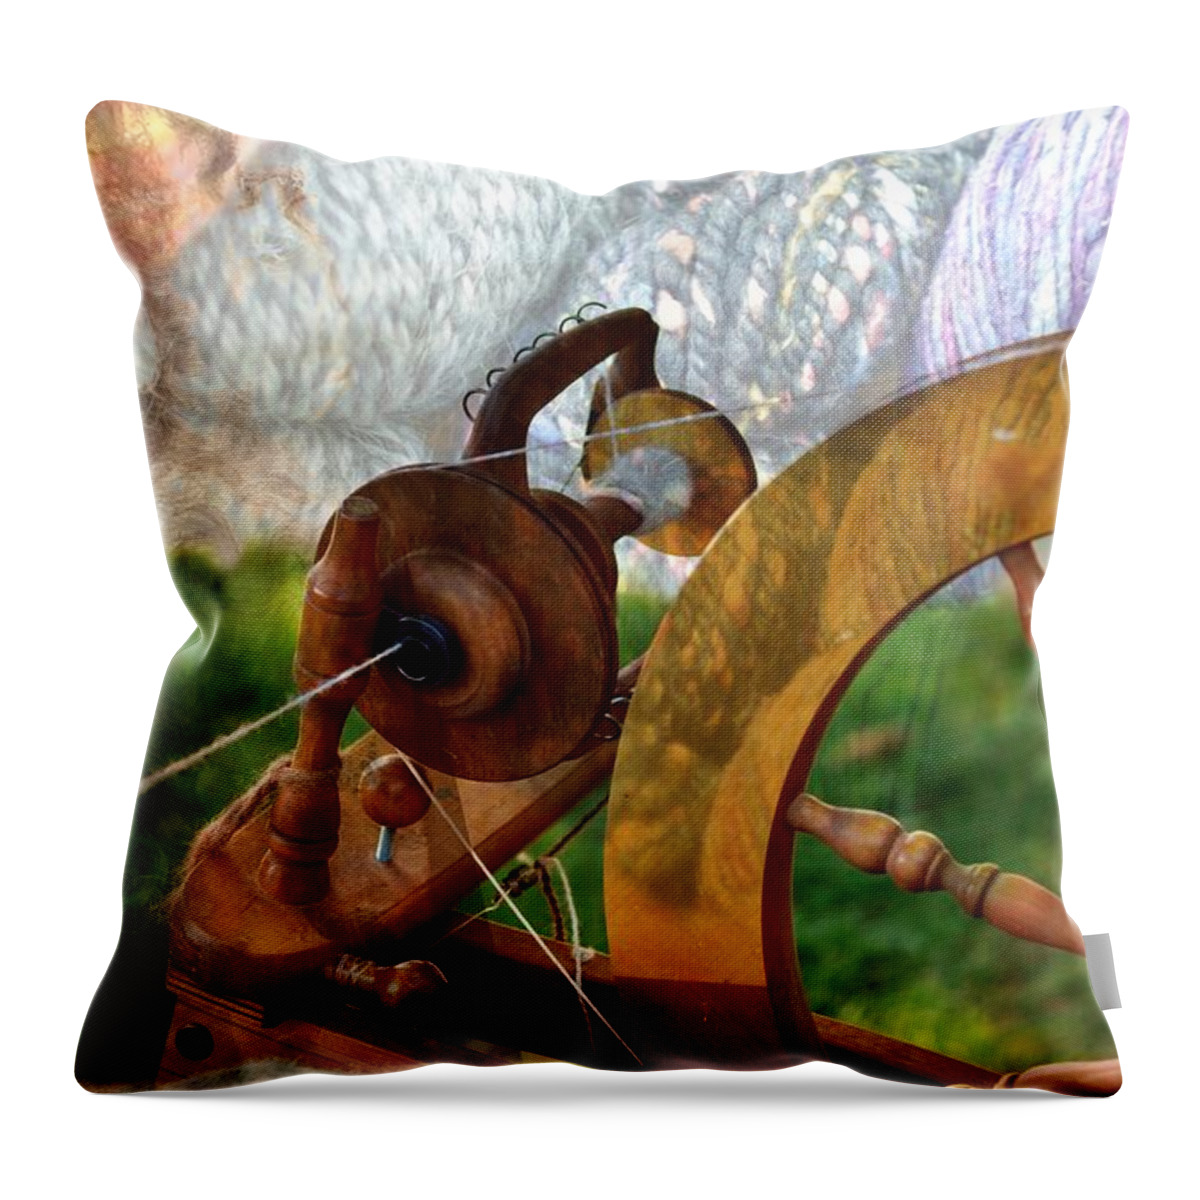 Spinning Wheel Throw Pillow featuring the photograph Spinning Art by Kae Cheatham